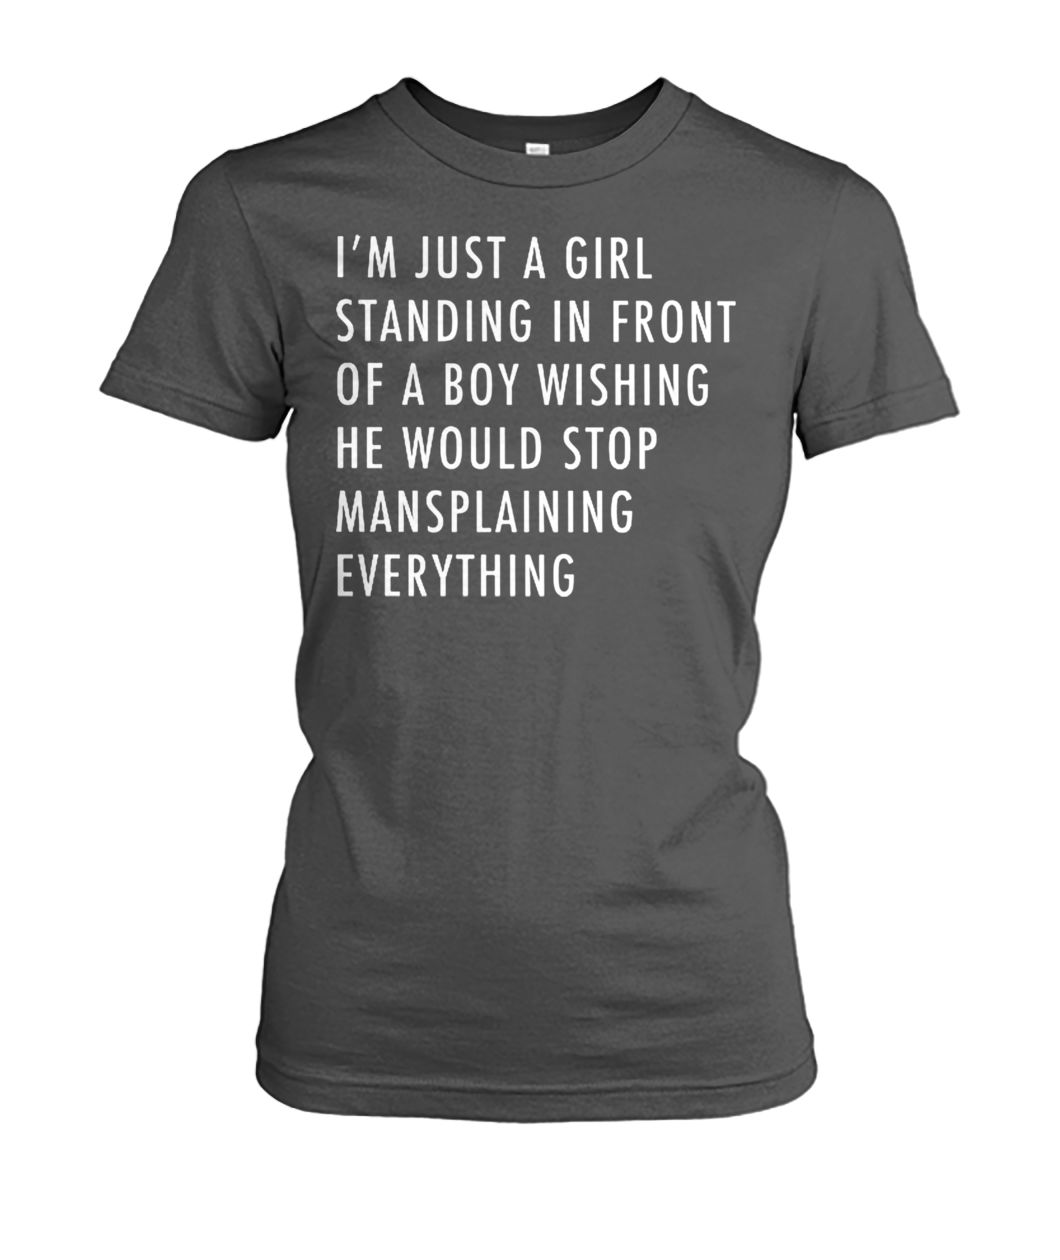 Just a girl standing front a boy wishing women's crew tee